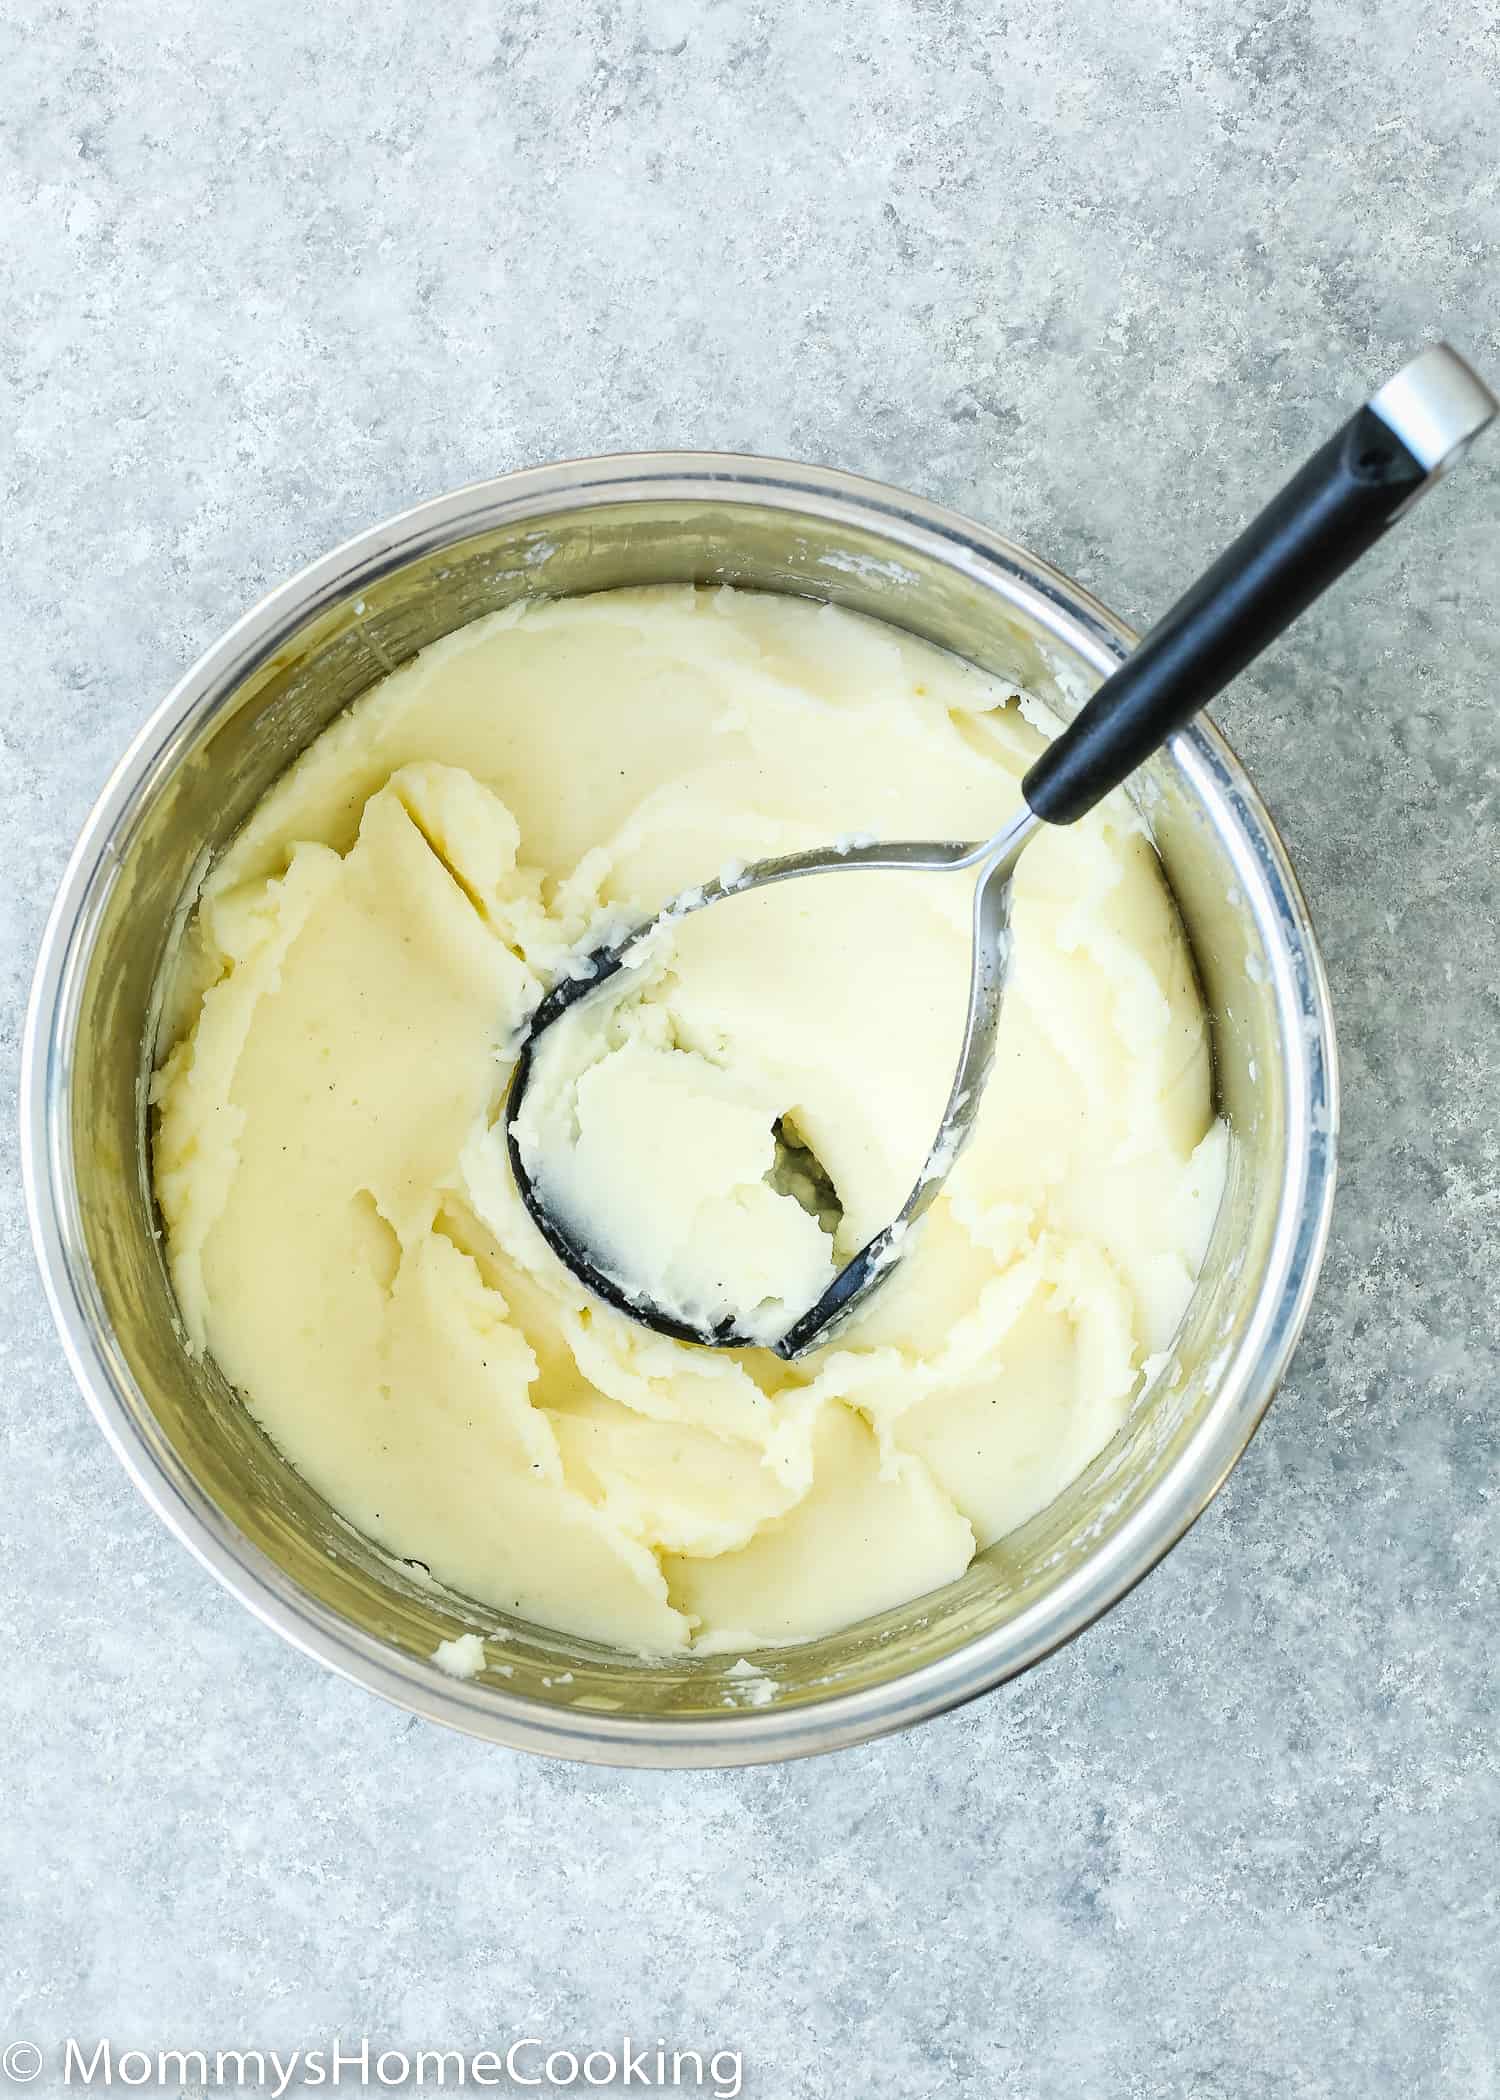 mashed potatoes in a instant pot with a potato smasher.